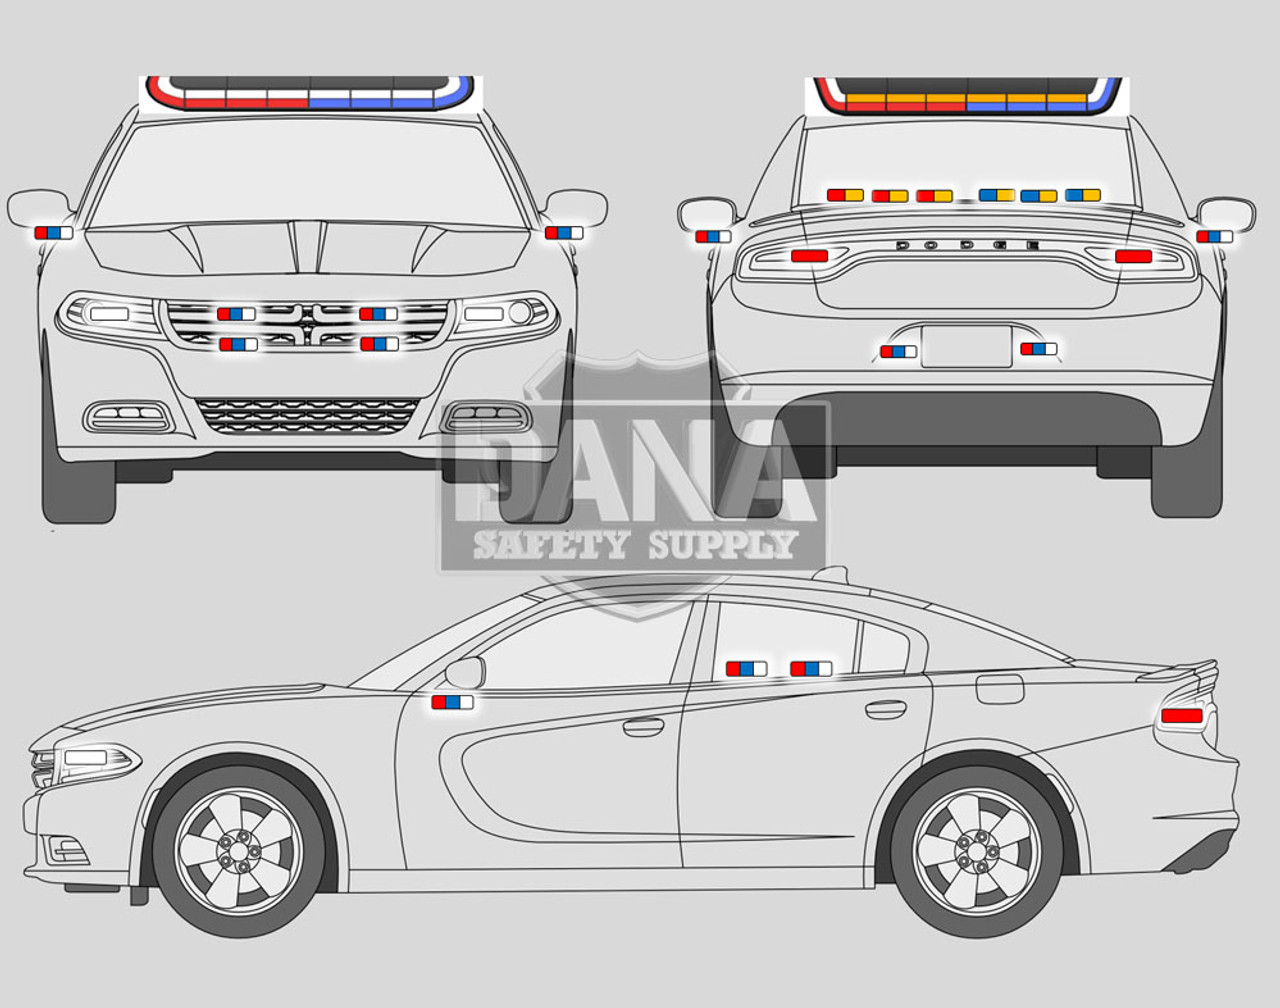 New 2023 Black Dodge Charger PPV V8 RWD ready to be built as a Marked Patrol Package Police Pursuit Car (Emergency Lighting, Siren, Controller, Partition, Window Bars, etc.), BCM4, + Delivery